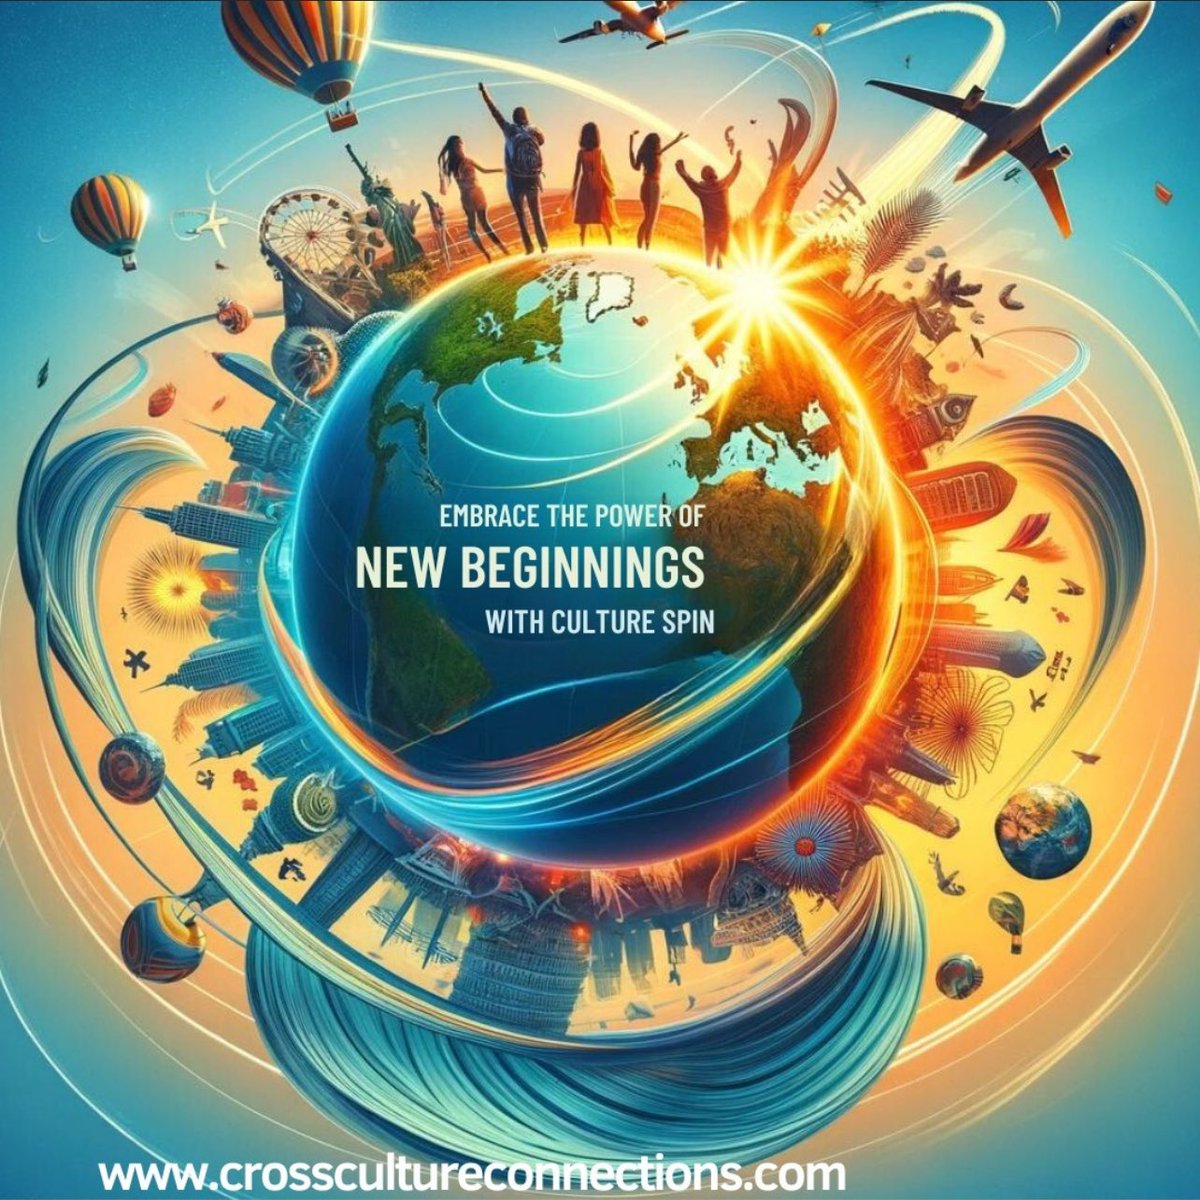 New #beginnings means new #opportunities! #CrossCultureConnections is here to help you master cultural competency with our #CultureSPINMethod! Our guide and resources are here to help you be the best you can be in this global world. Visit crosscultureconnections.com today!